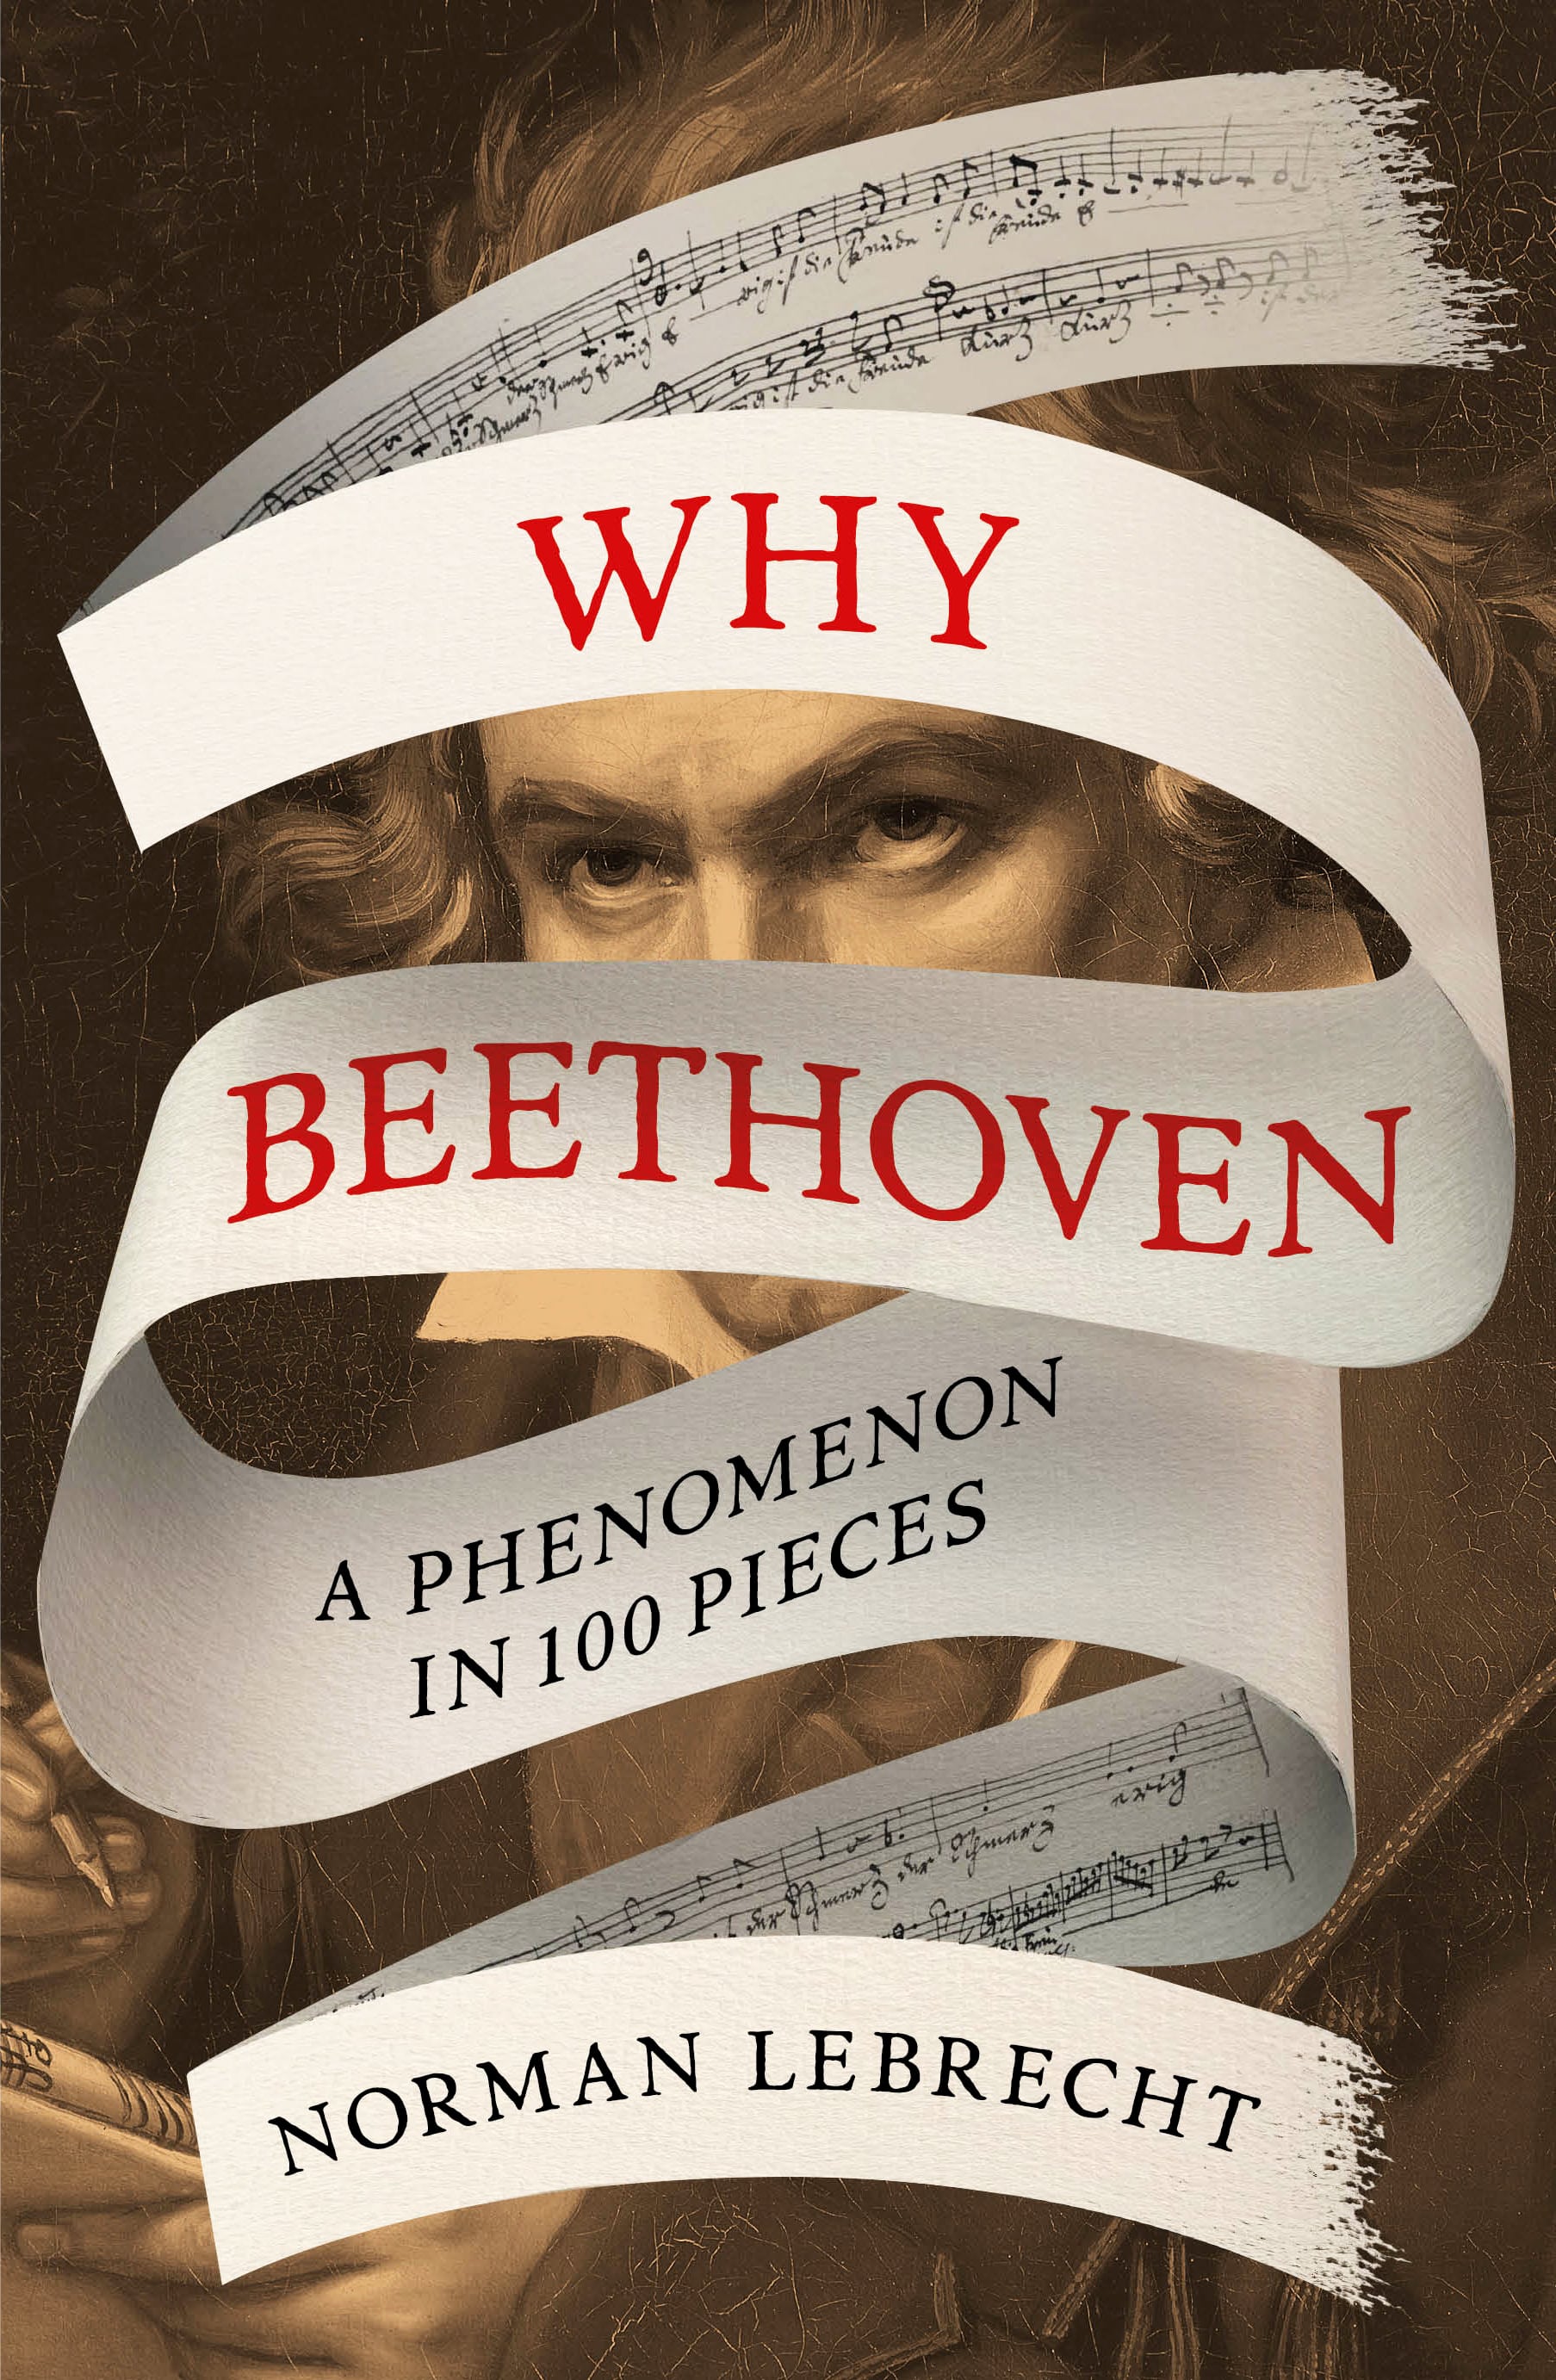 Why Beethoven: The Wigmore Hall event